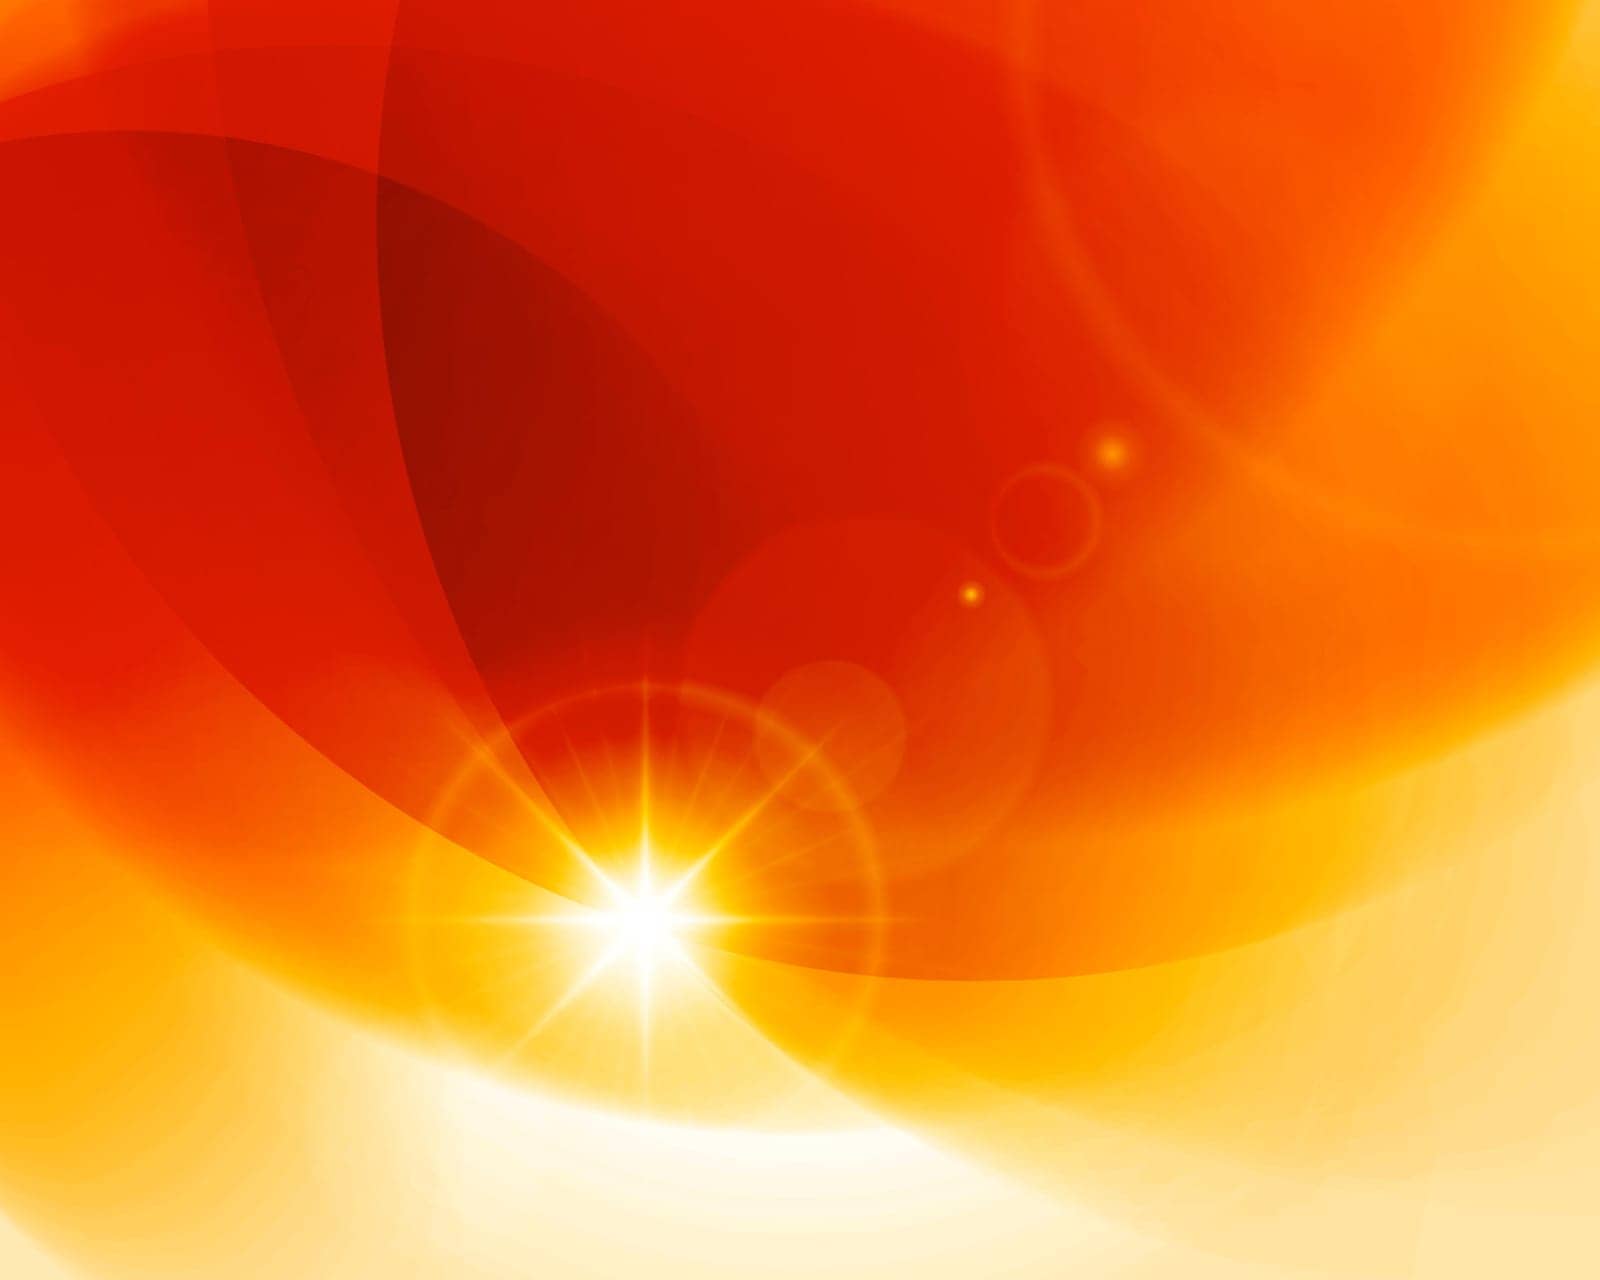 A vibrant abstract design with swirls in shades of red, orange, and yellow, accented by a prominent light flare, evokes feelings of warmth and energy.